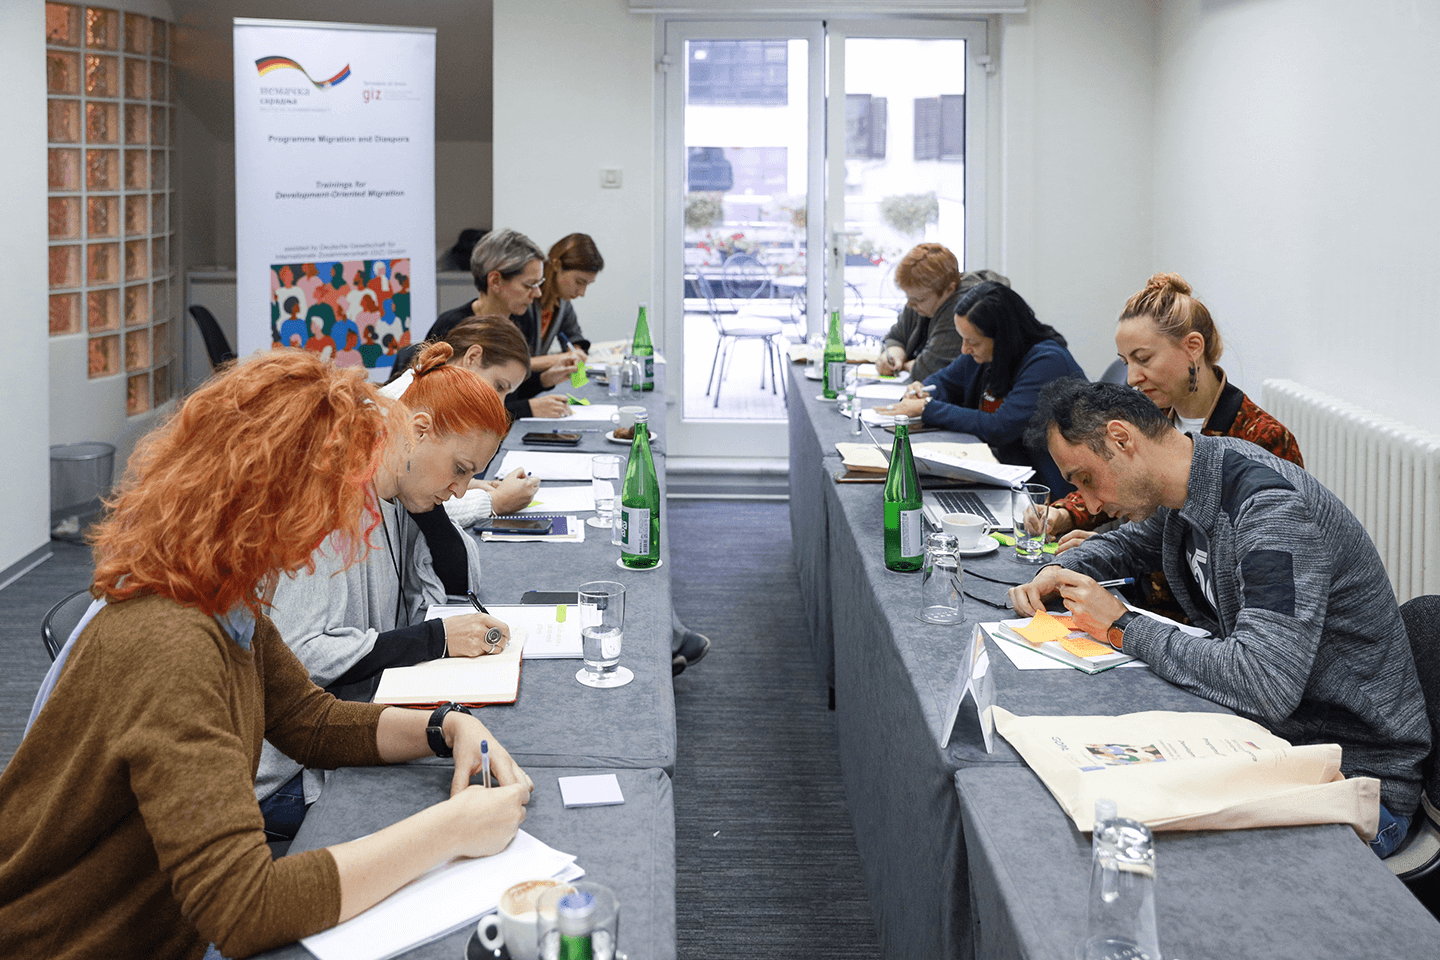 Global program “Migration and Diaspora” (PMD) organized trainings for more than 200 representatives of ministries and civil society in Serbia